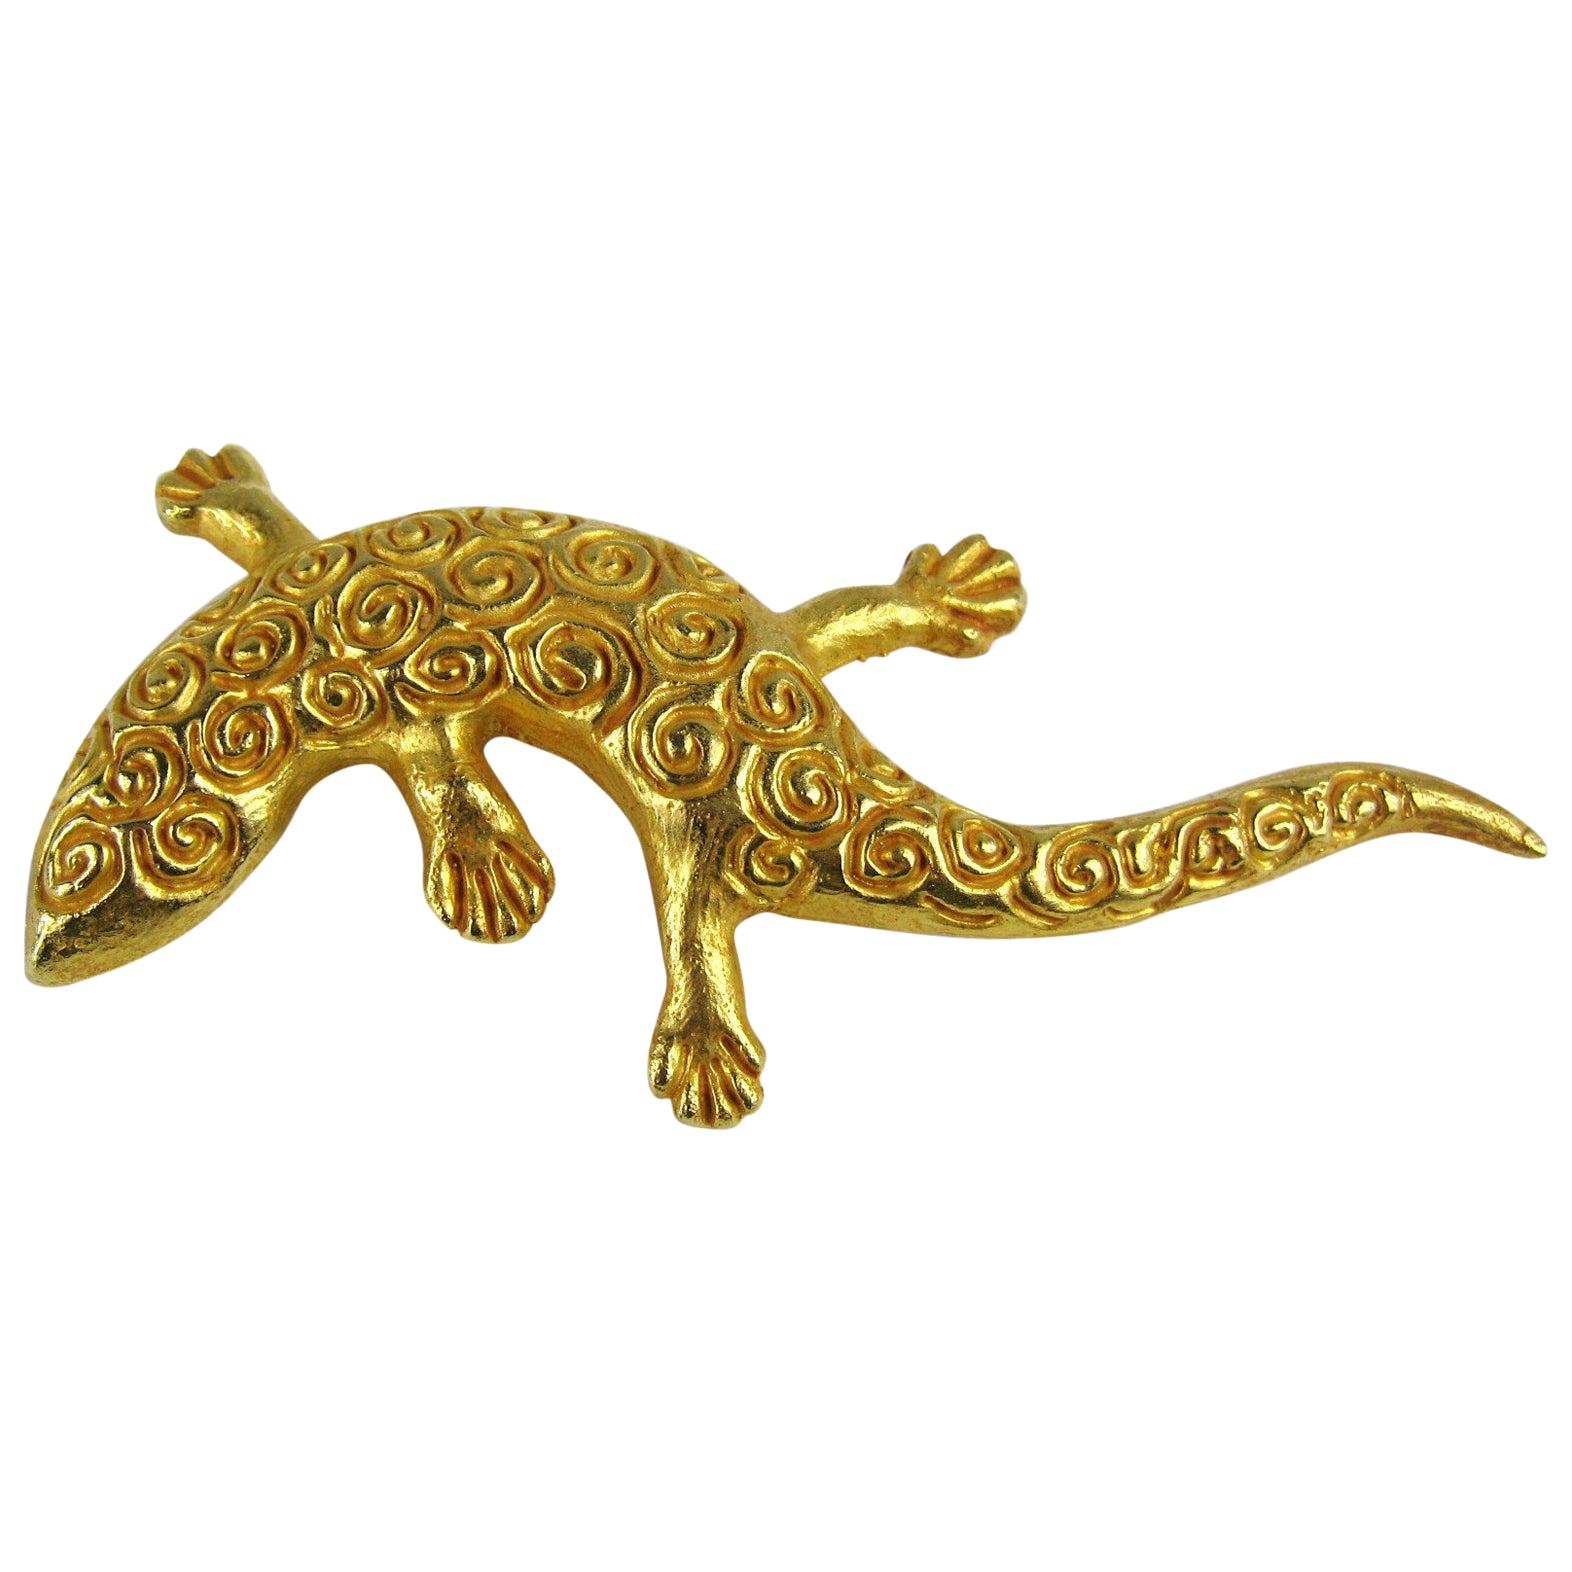  Dominique Aurientis Made France Lizard Gilt Gold Pin Brooch, Never worn 1980s For Sale